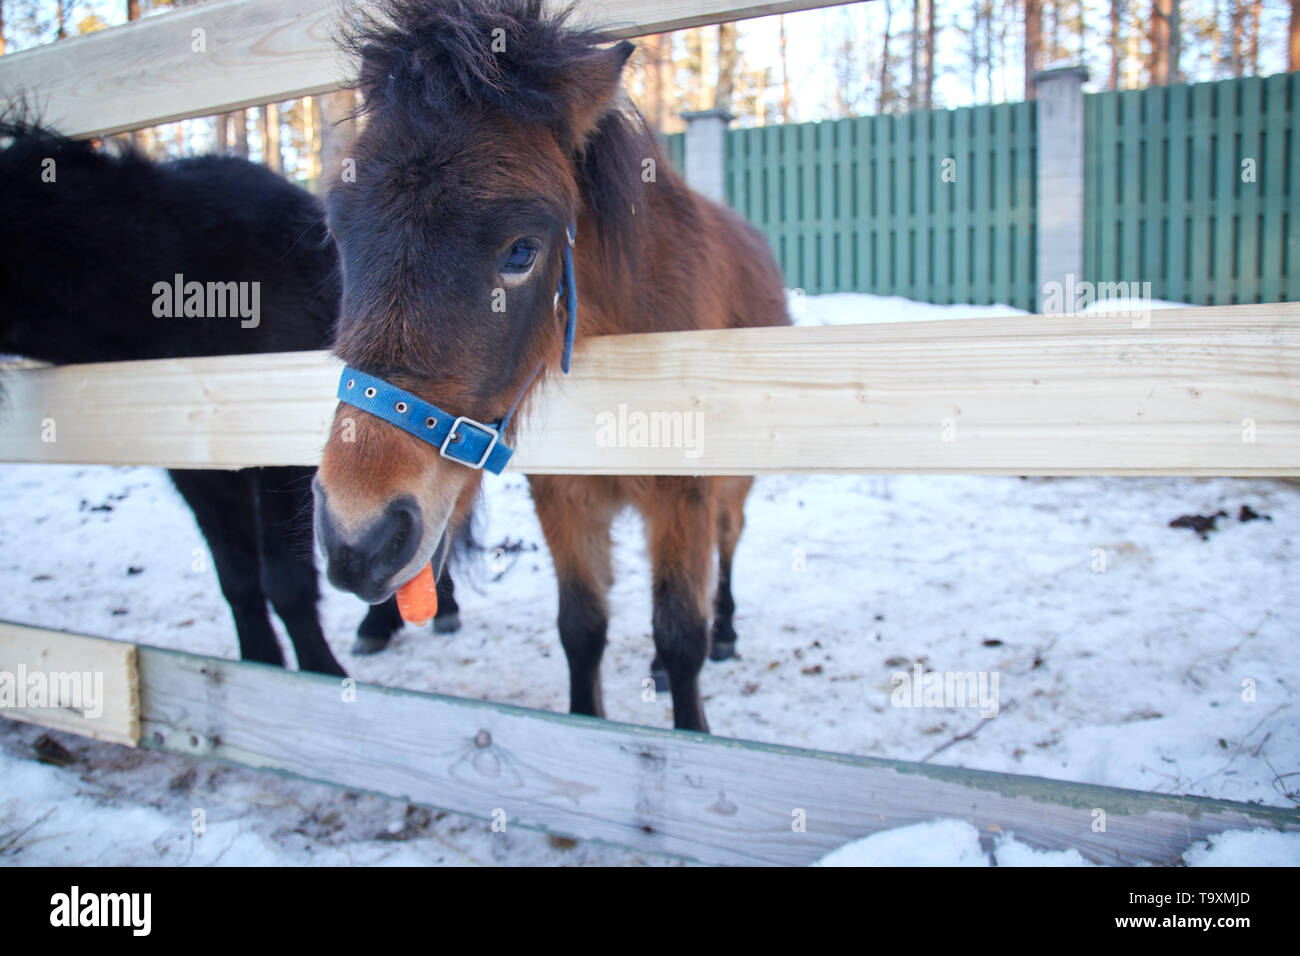 black pony in a pen with wool. Portrait of a pony closeup in winter season. Stock Photo